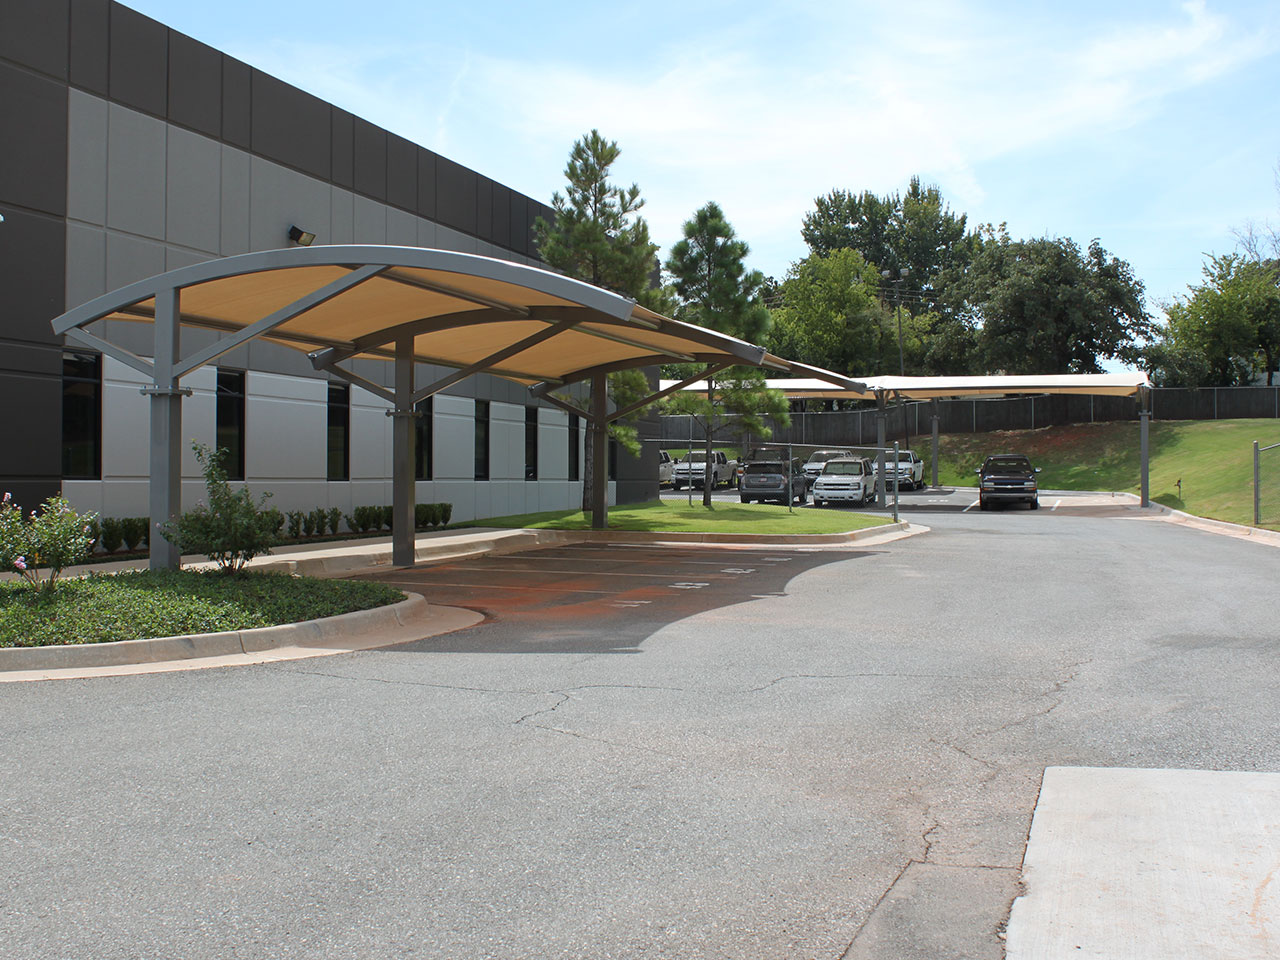 shades covering outdoor parking area